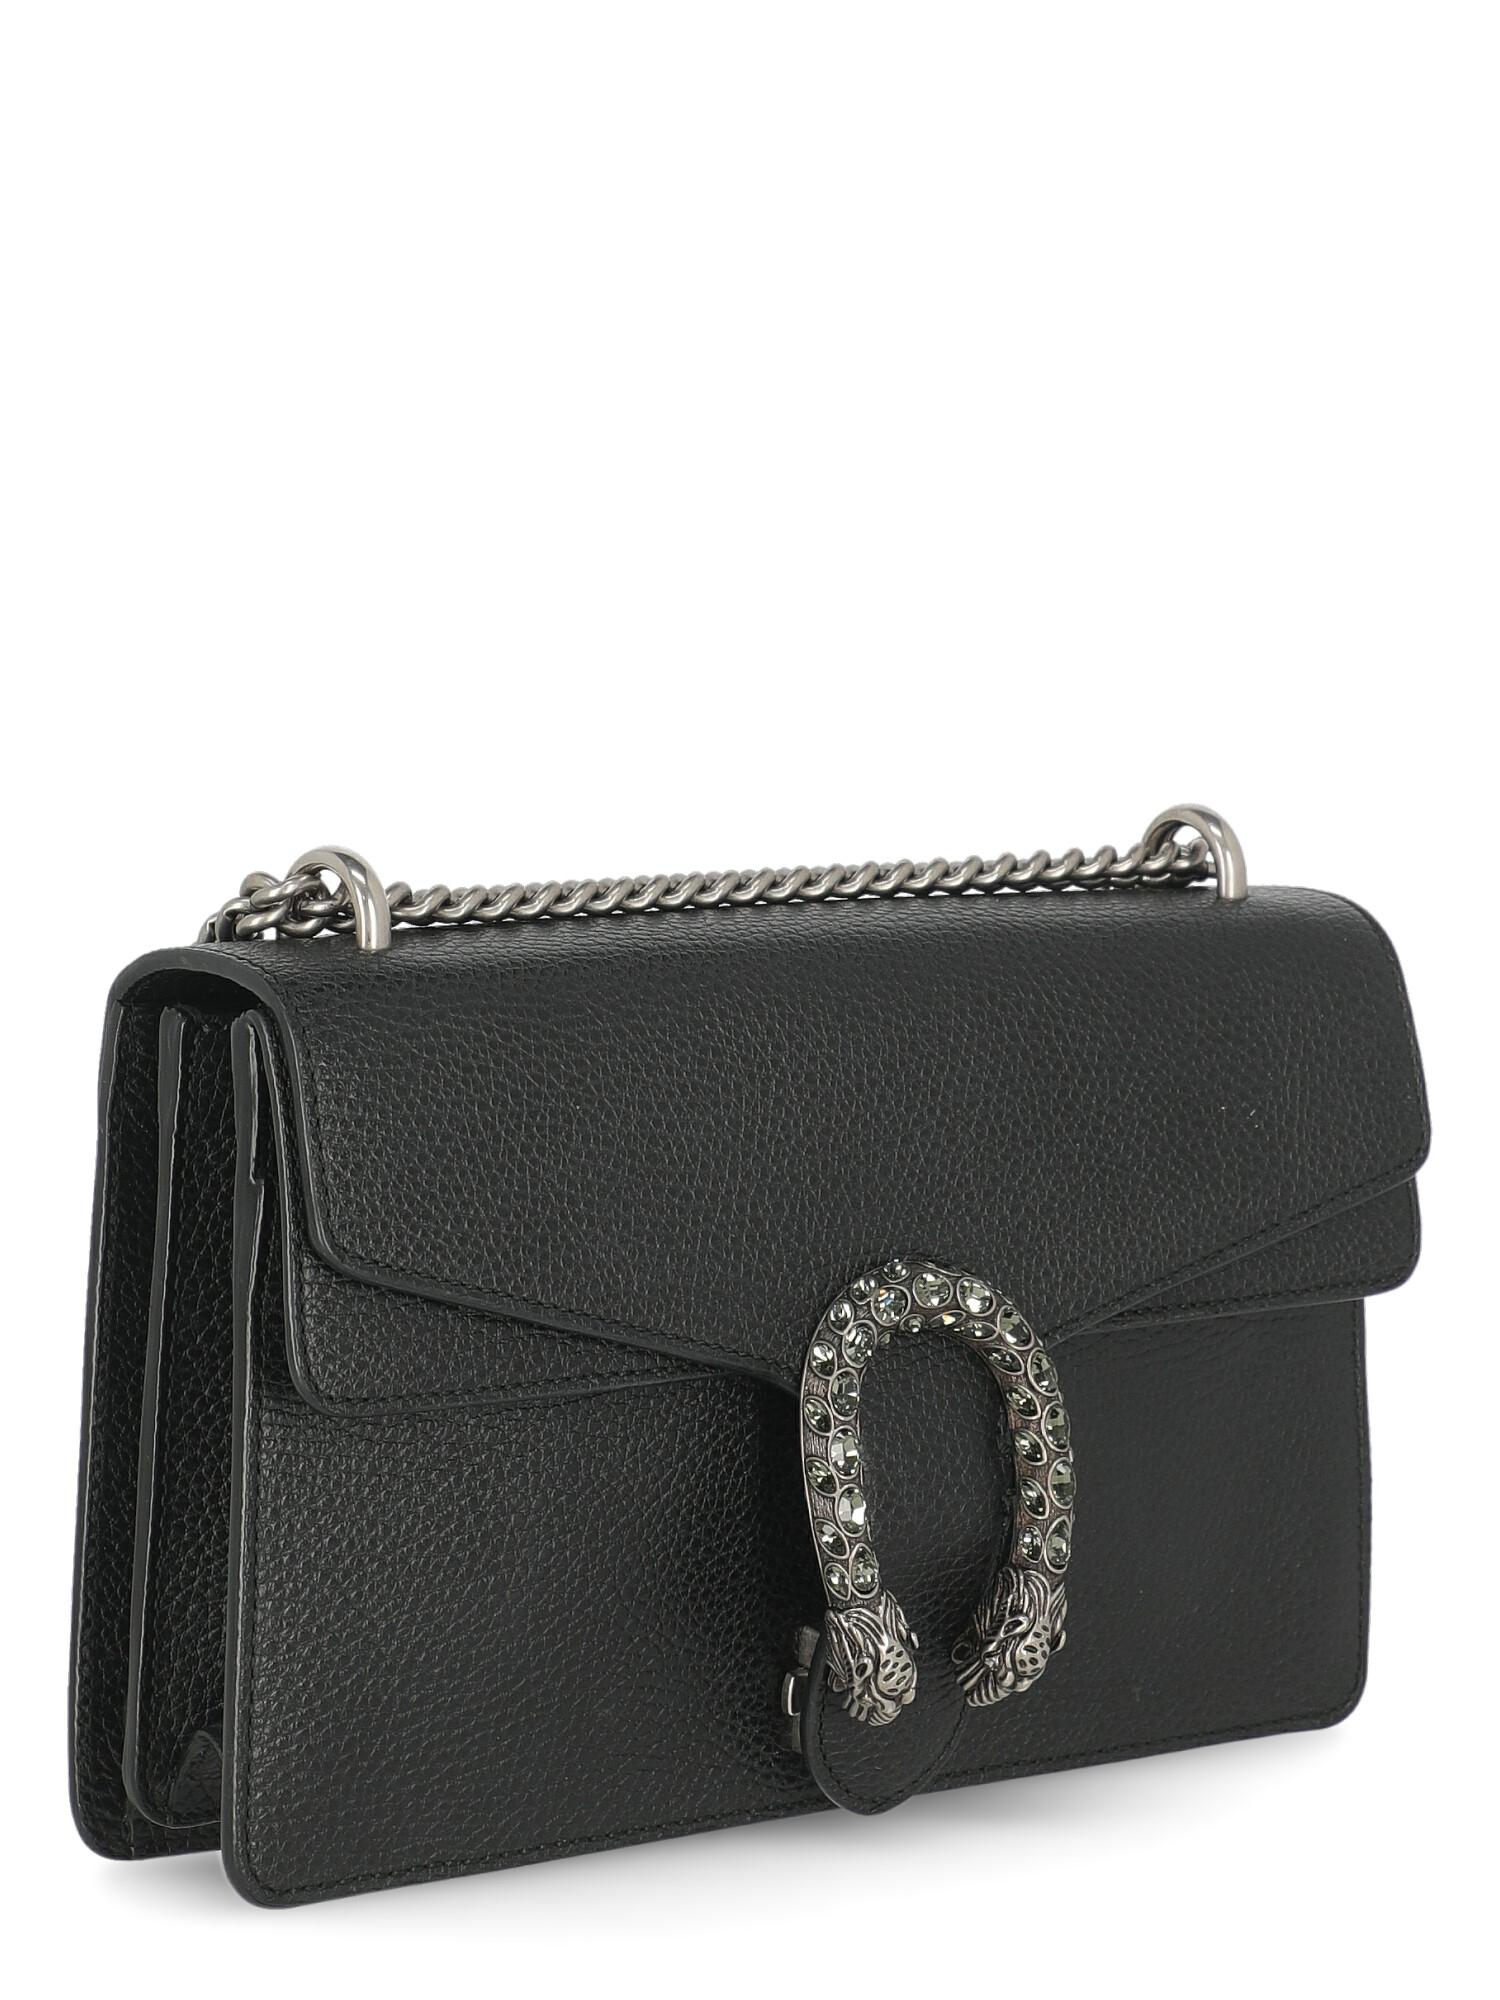 Gucci Women's Crossbody Bag Dionysus Black Leather In Excellent Condition For Sale In Milan, IT